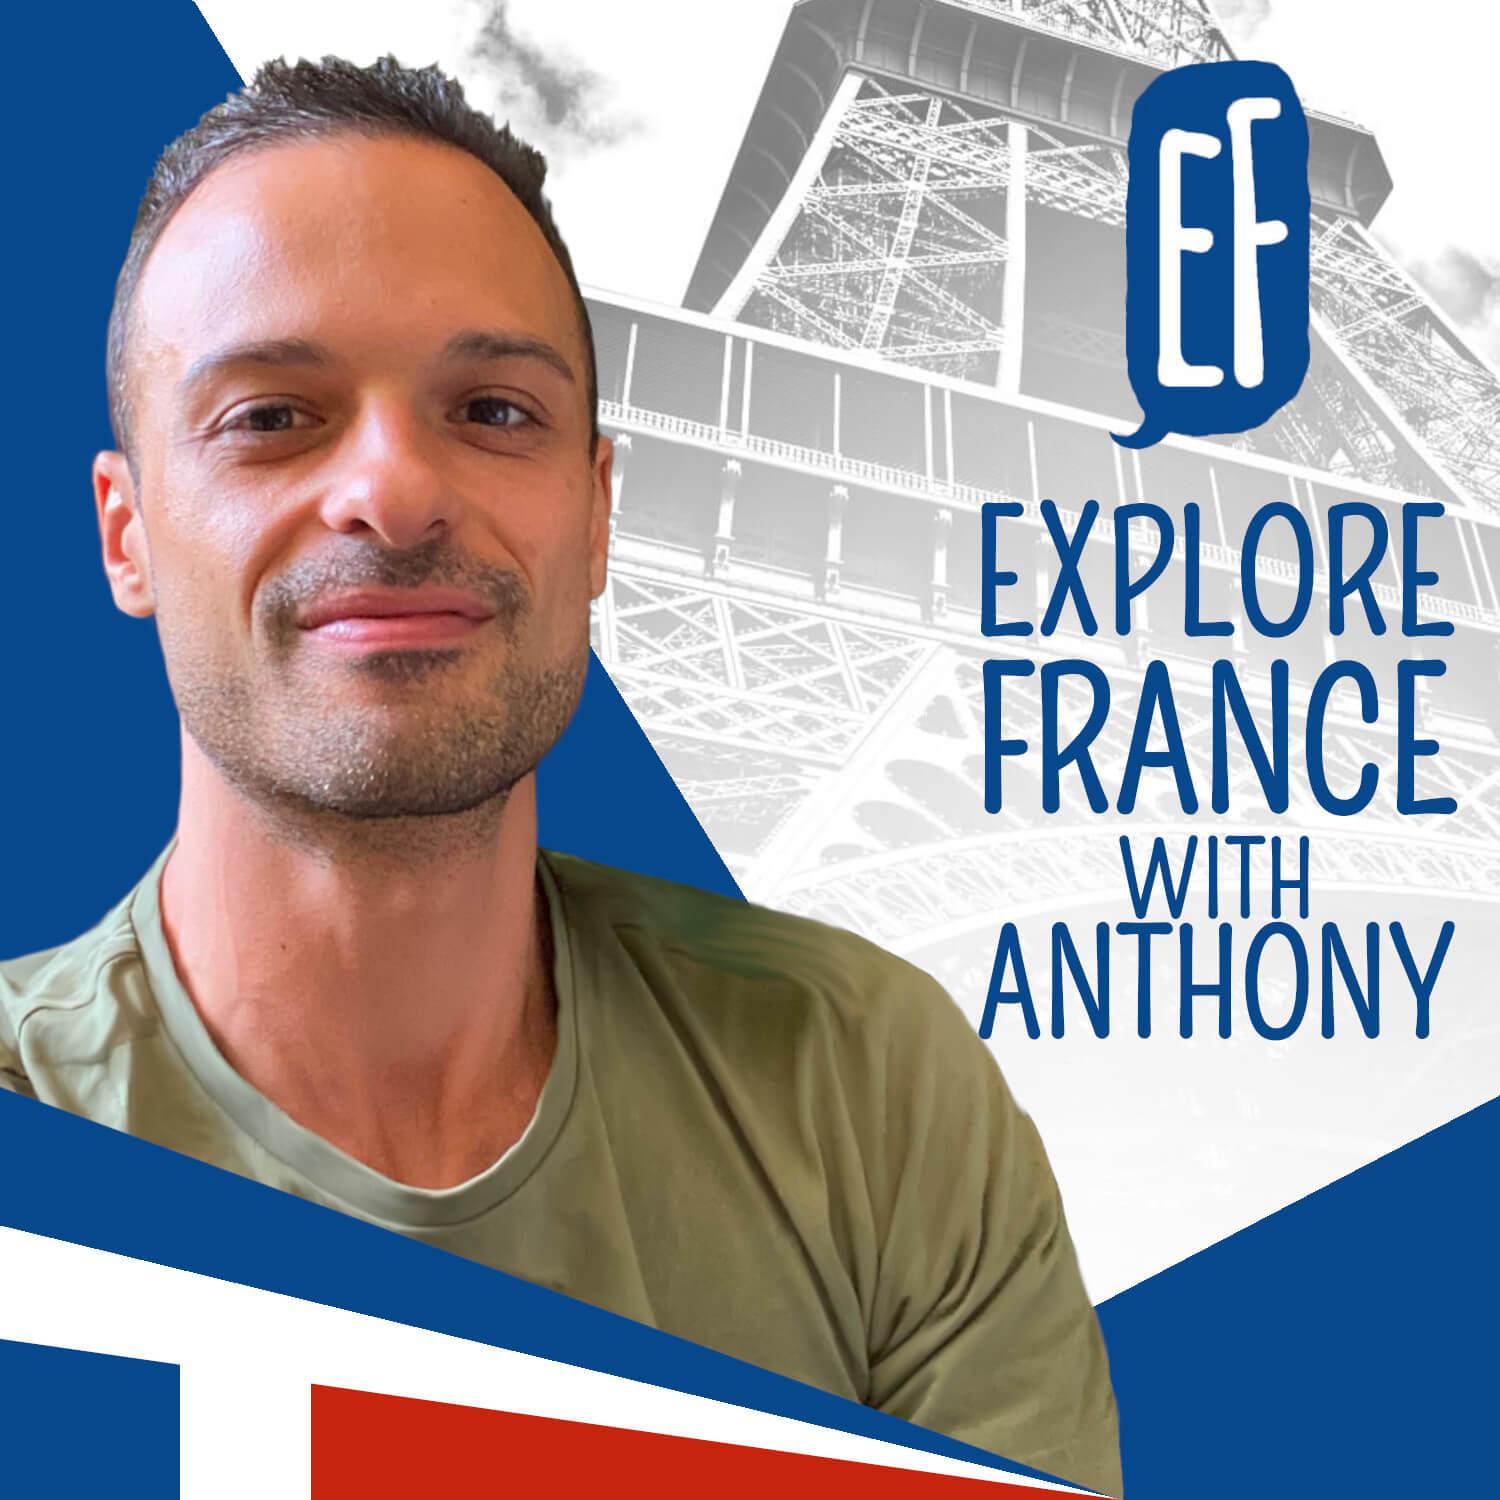 Podcast Explore France with Anthony